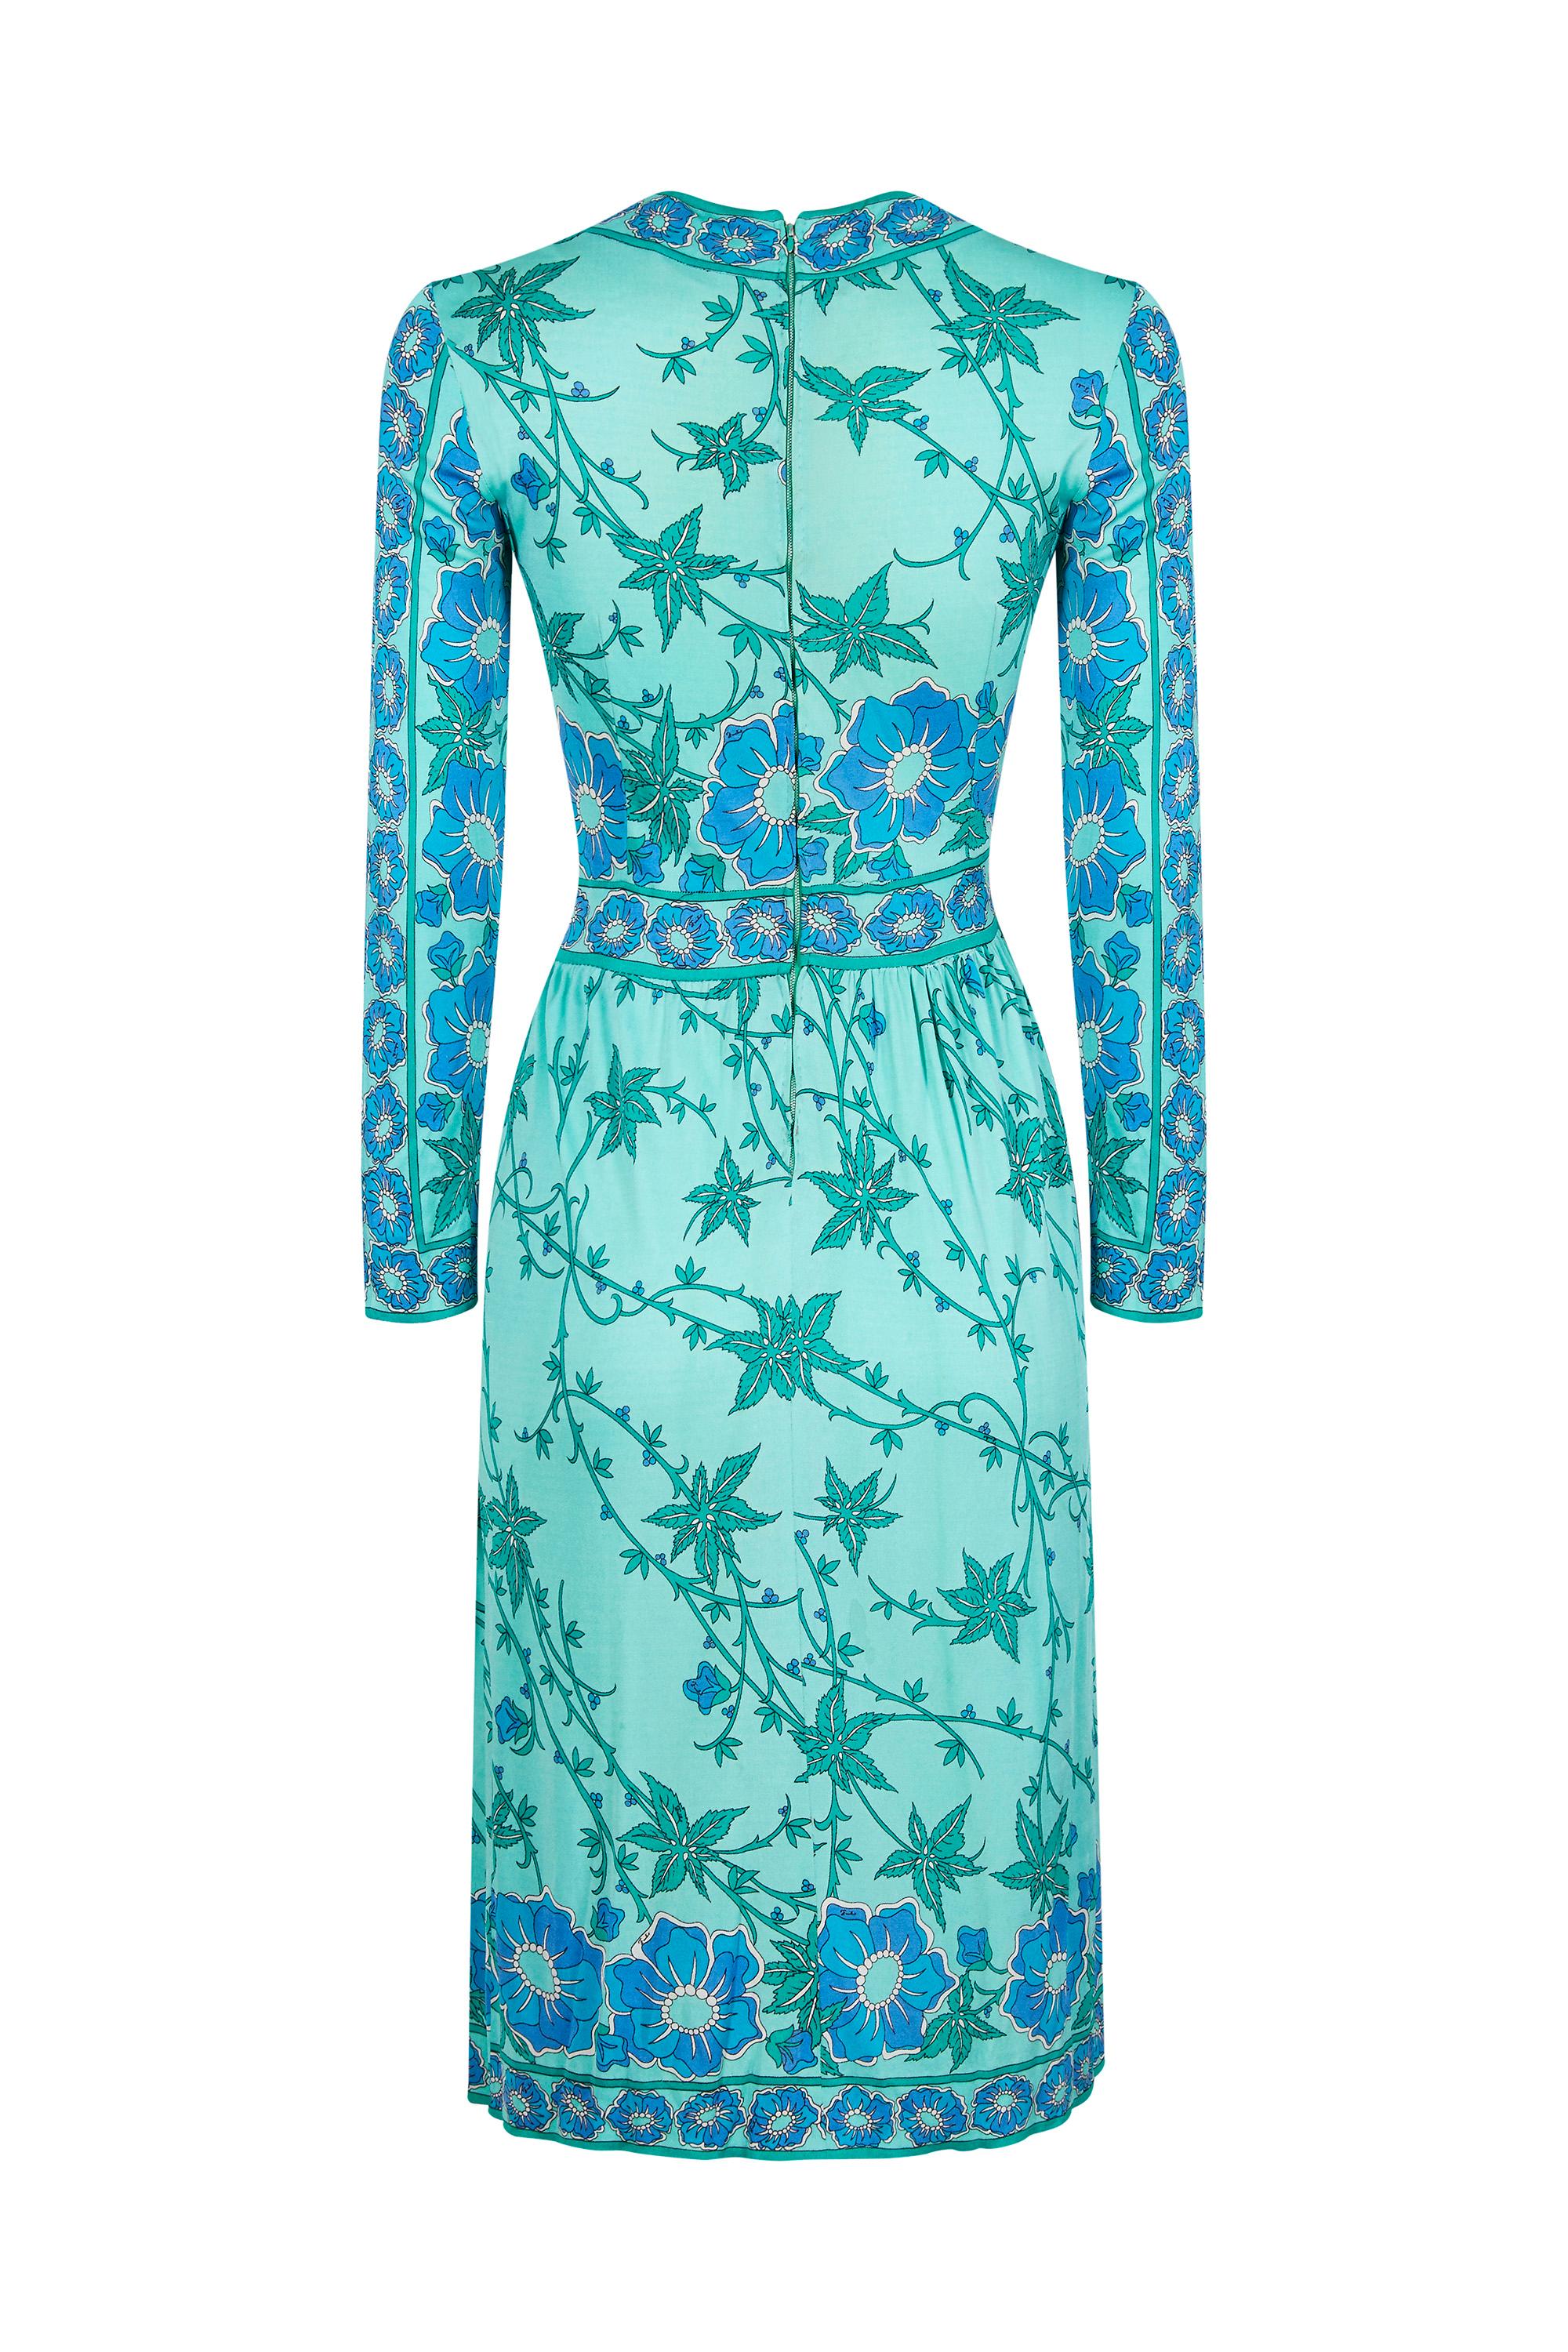 Blue 1970s Emilio Pucci Turquoise Silk Jersey Dress For Sale